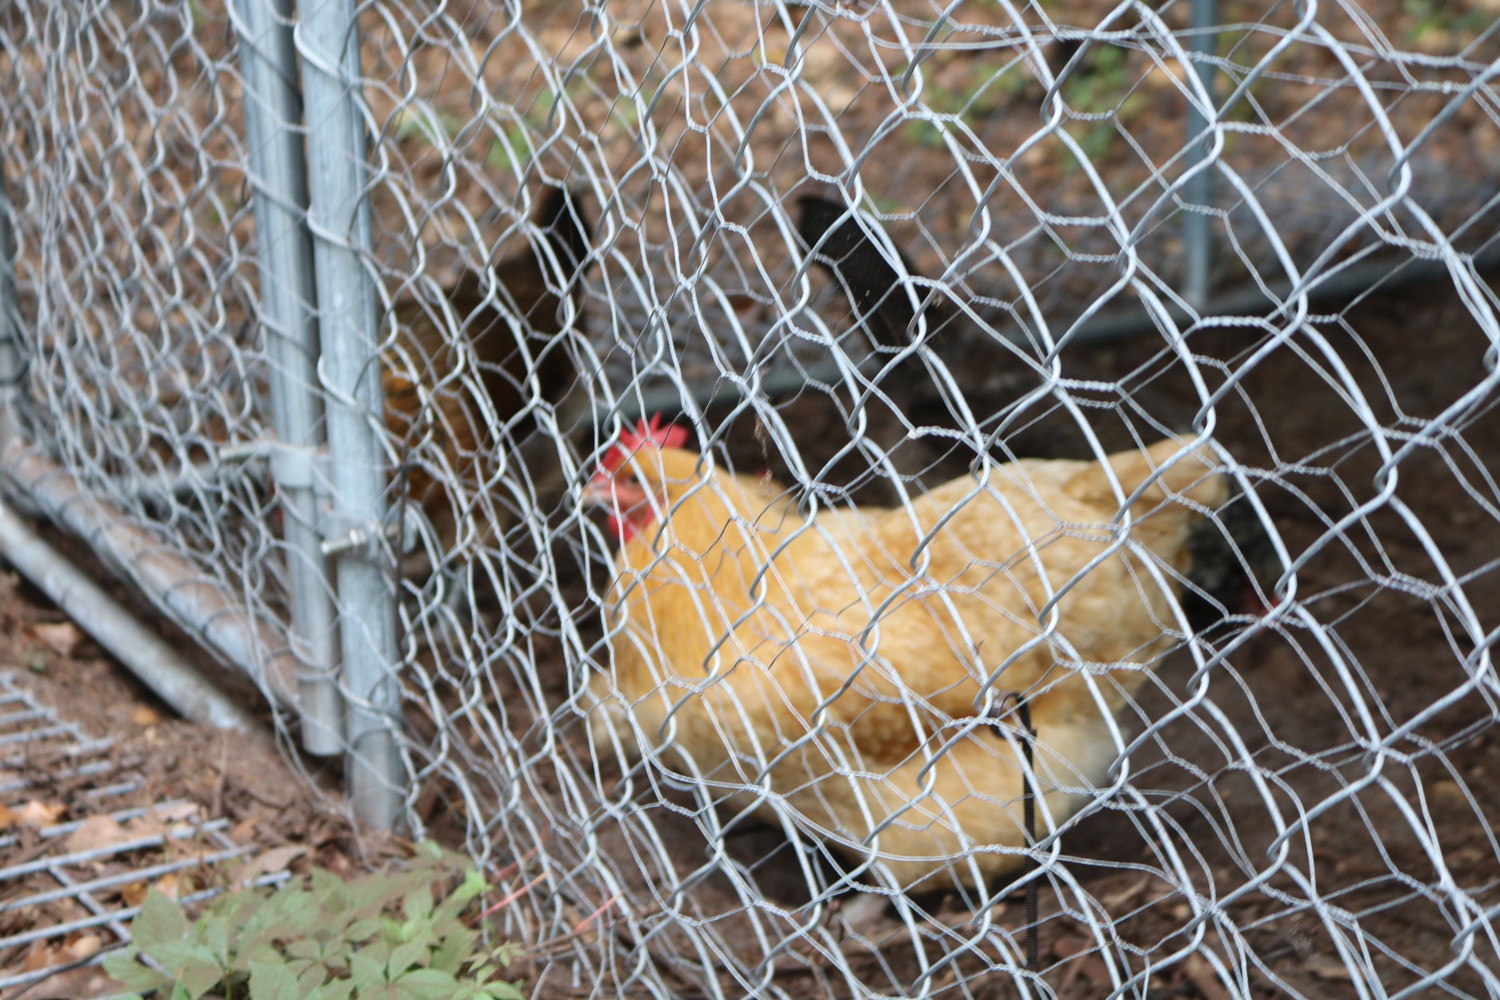 The resort is also home to a chicken coop.